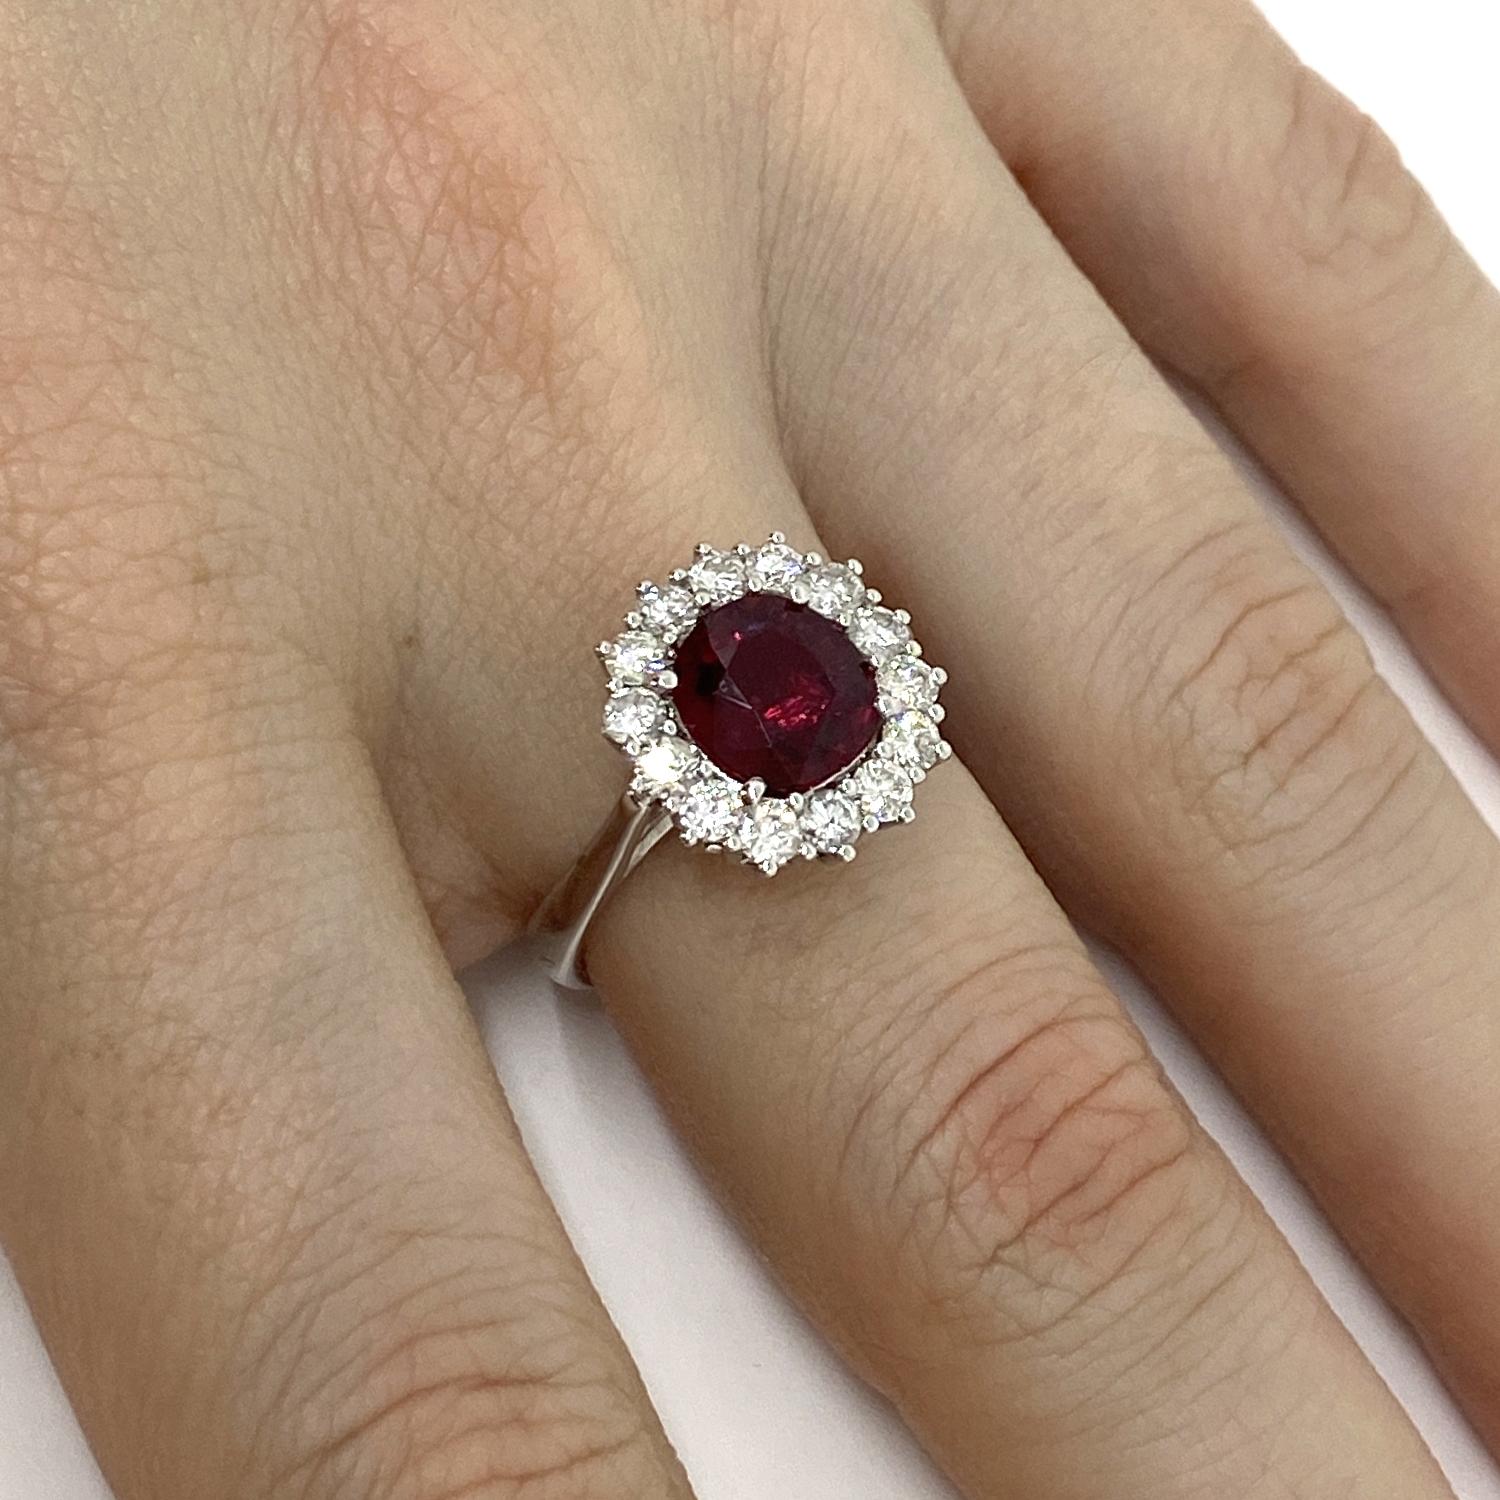 Ring made of 18kt white gold with natural brilliant-cut ruby for ct.2.11 and brilliant-cut white natural diamond surround for ct.0.74
-------------------------------------------------

Important Note : In order to speed up the publishing process of